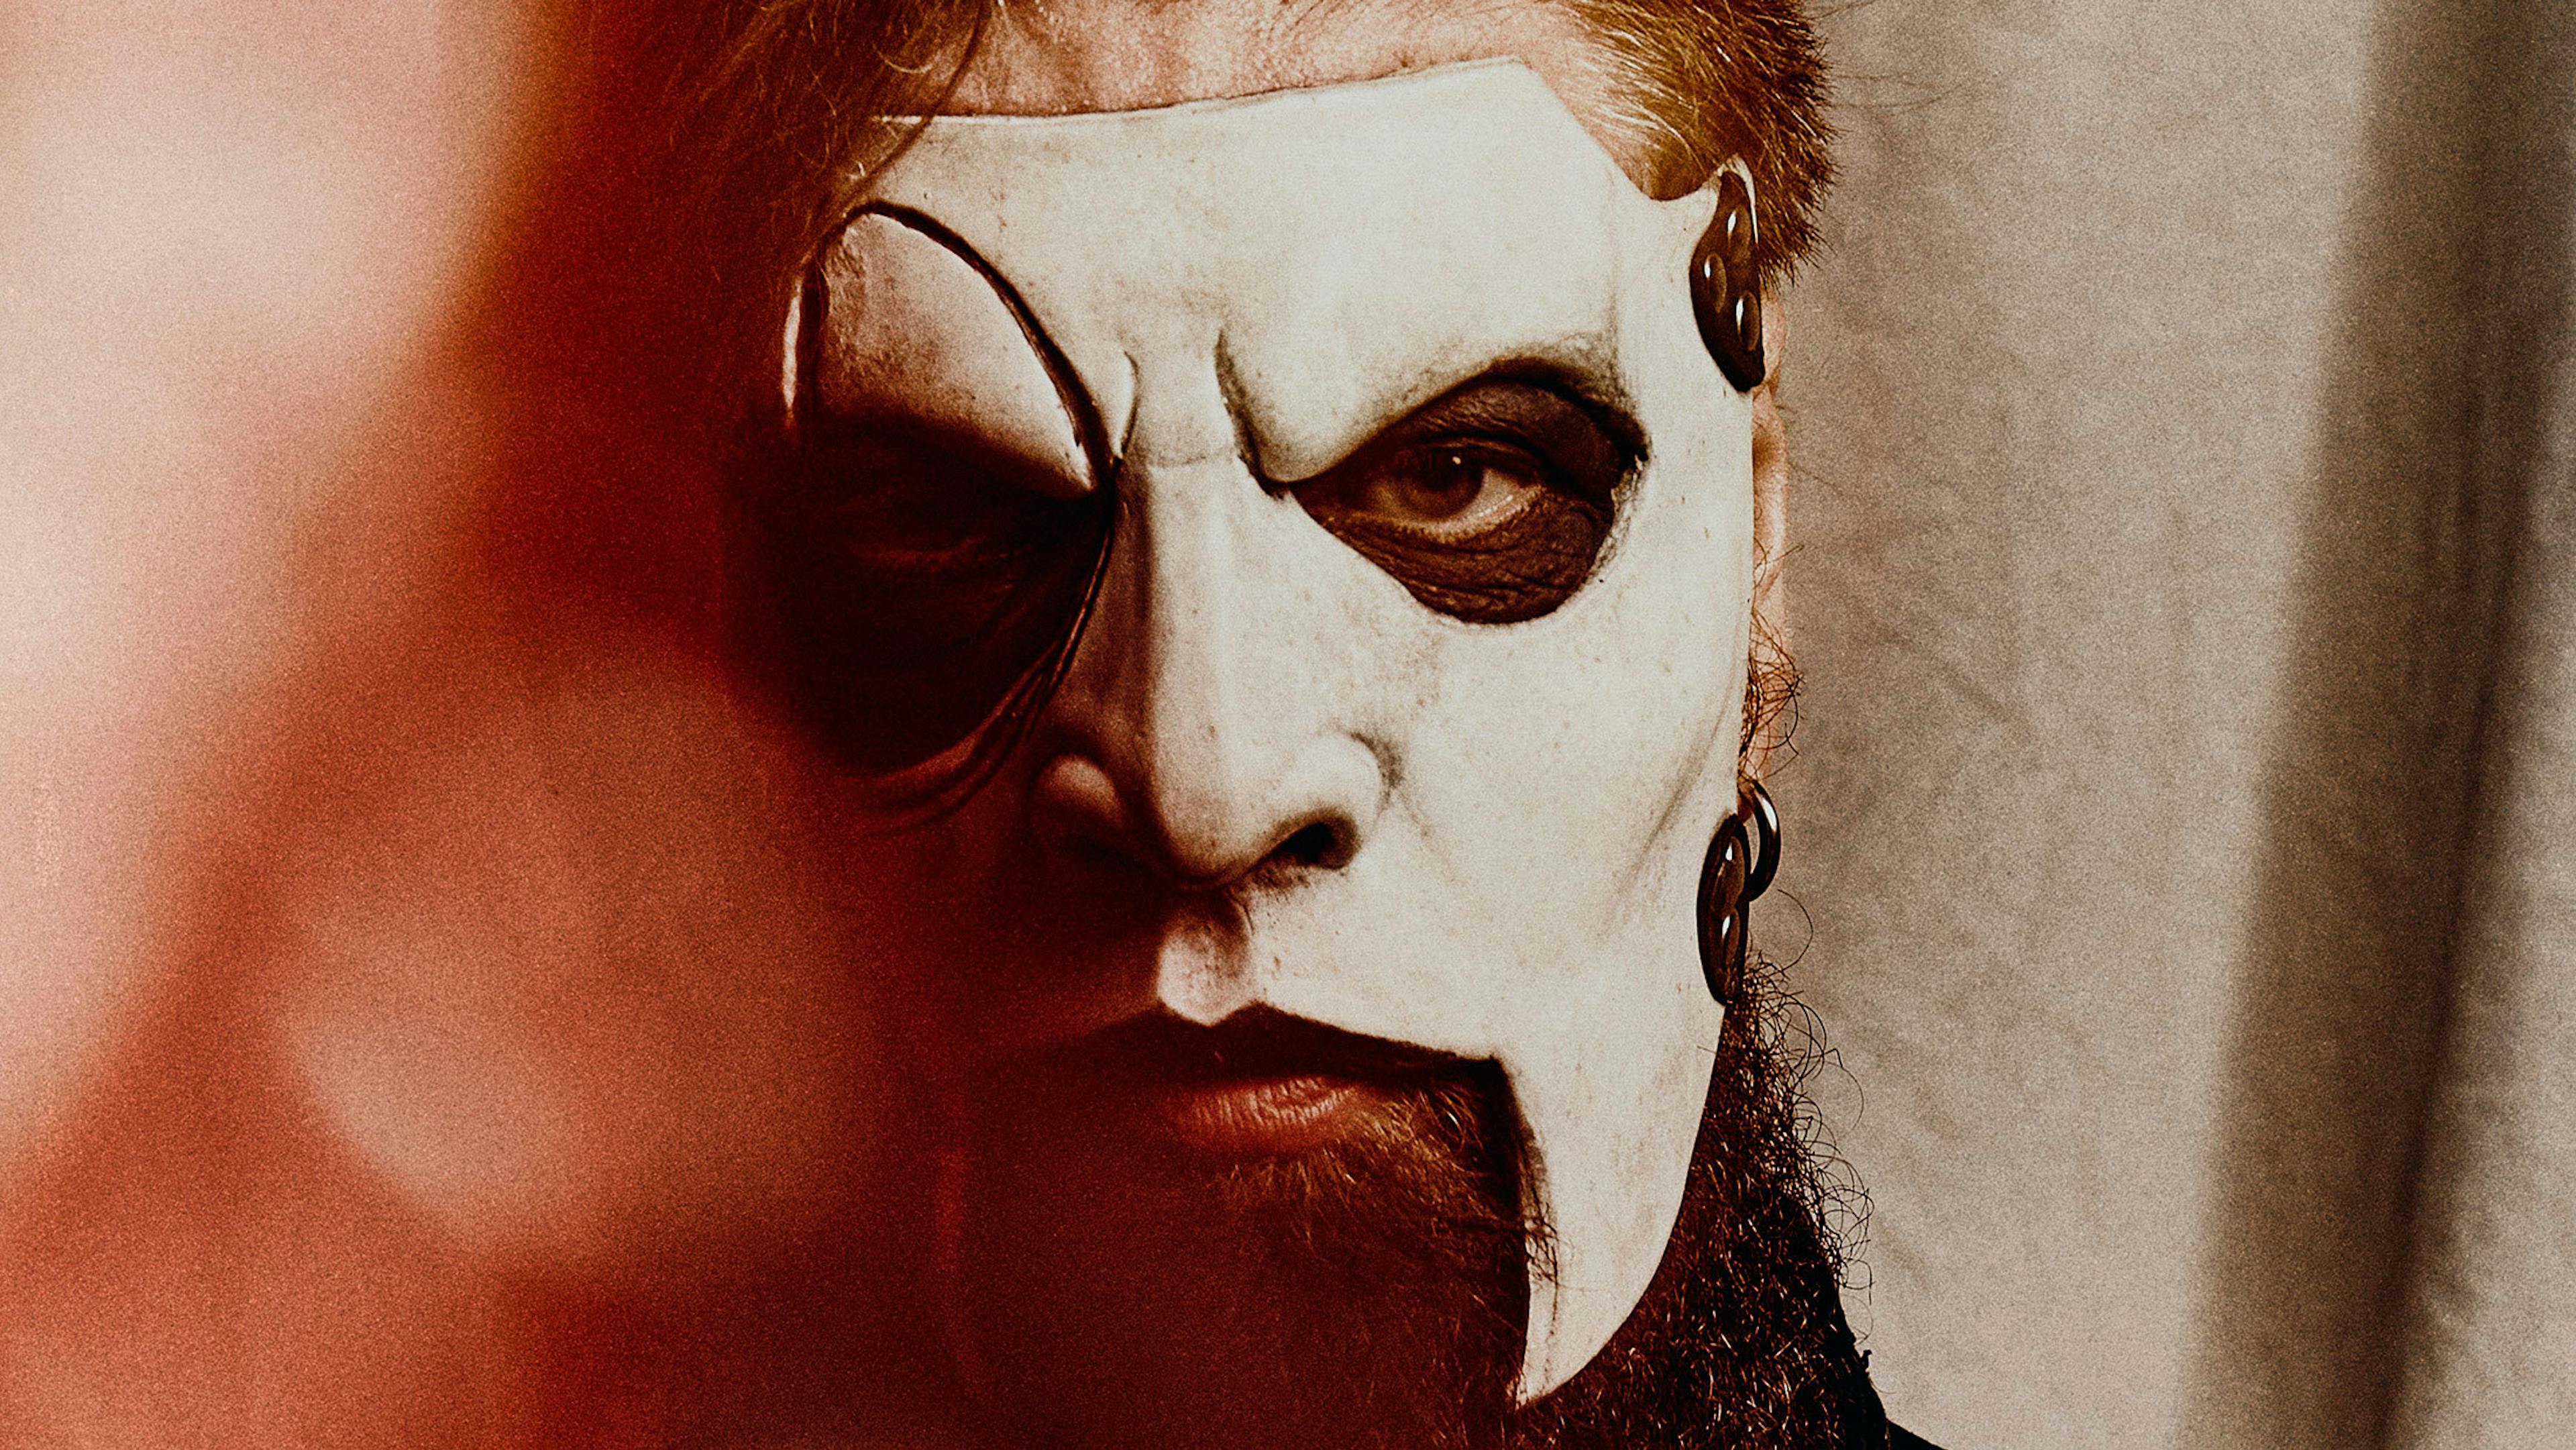 Slipknot's Jim Root Wants To Play We Are Not Your Kind In Full Live